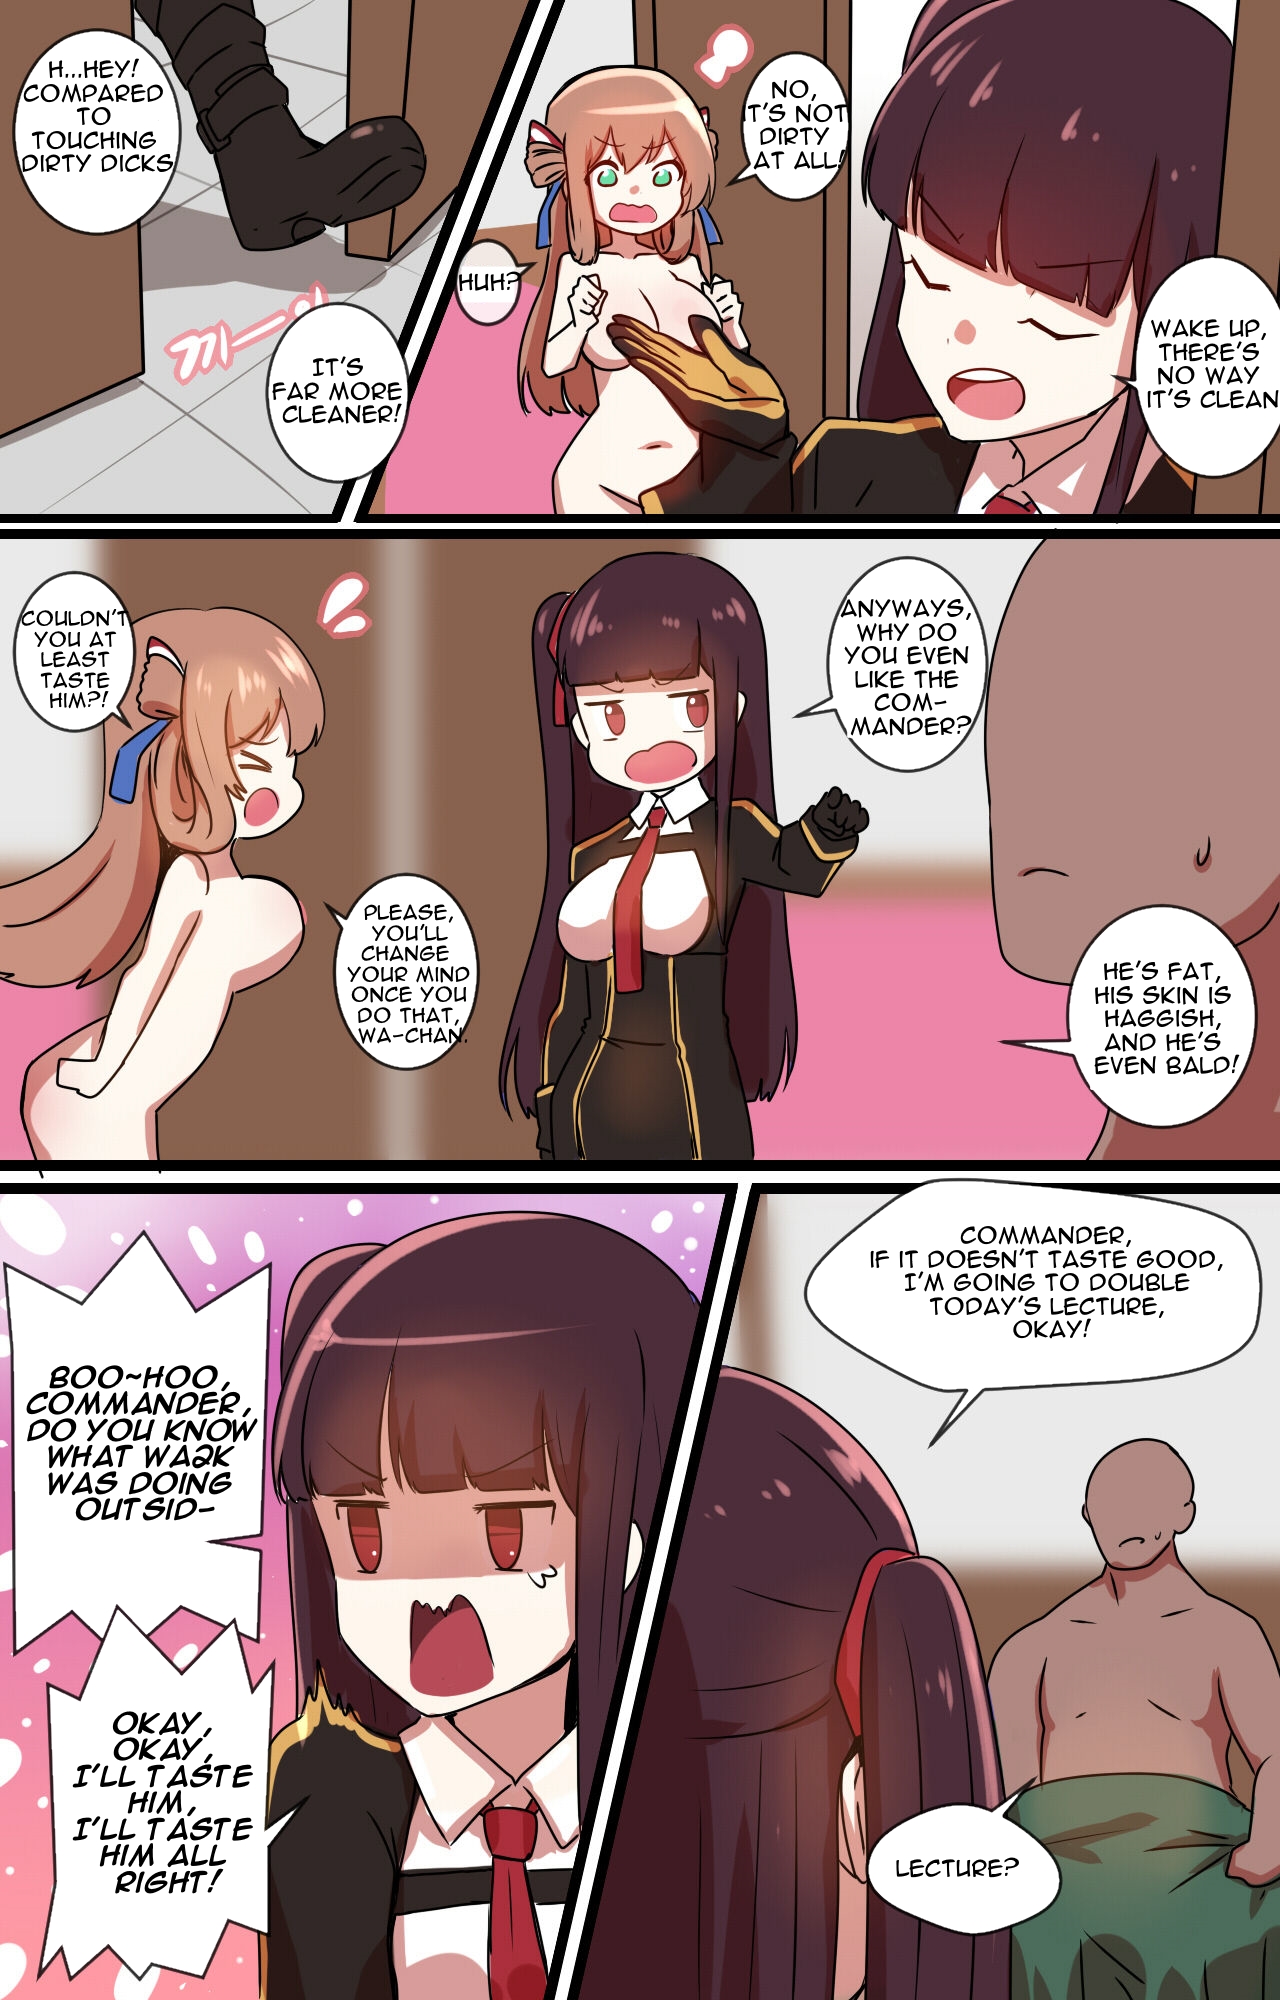 [yun-uyeon (ooyun)] How to use dolls 02 (Girls Frontline) [English] page 5 full